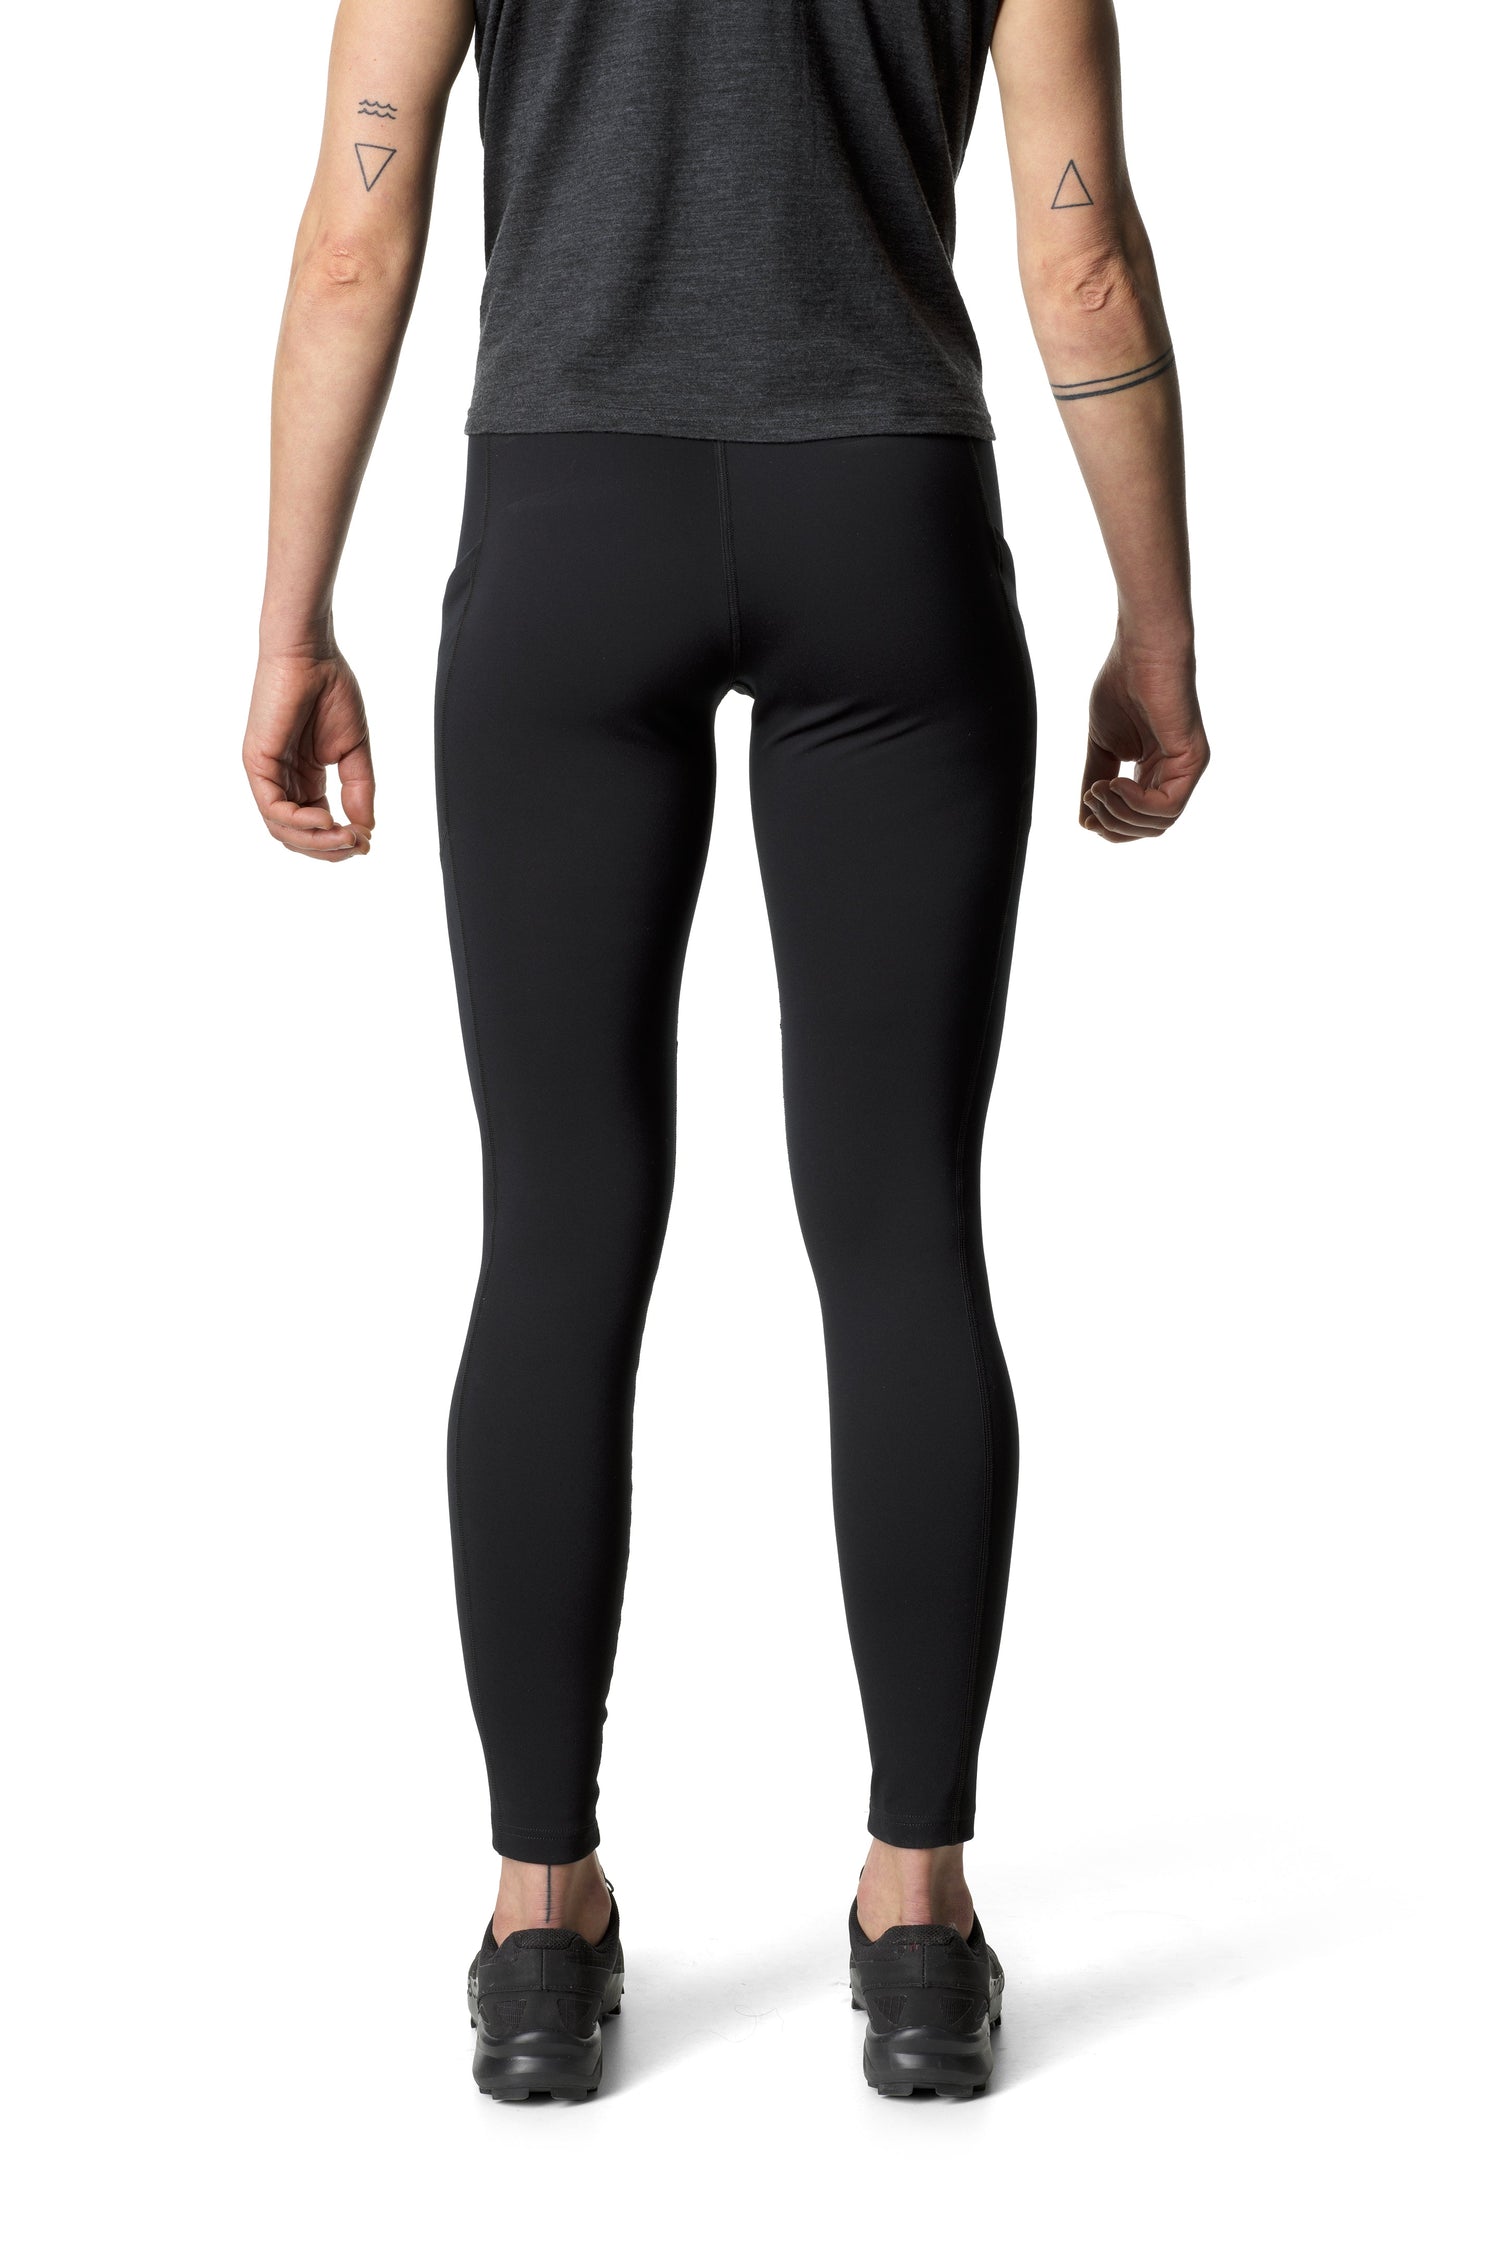 Houdini W's Adventure Tights - Recycled Polyester True Black Pants